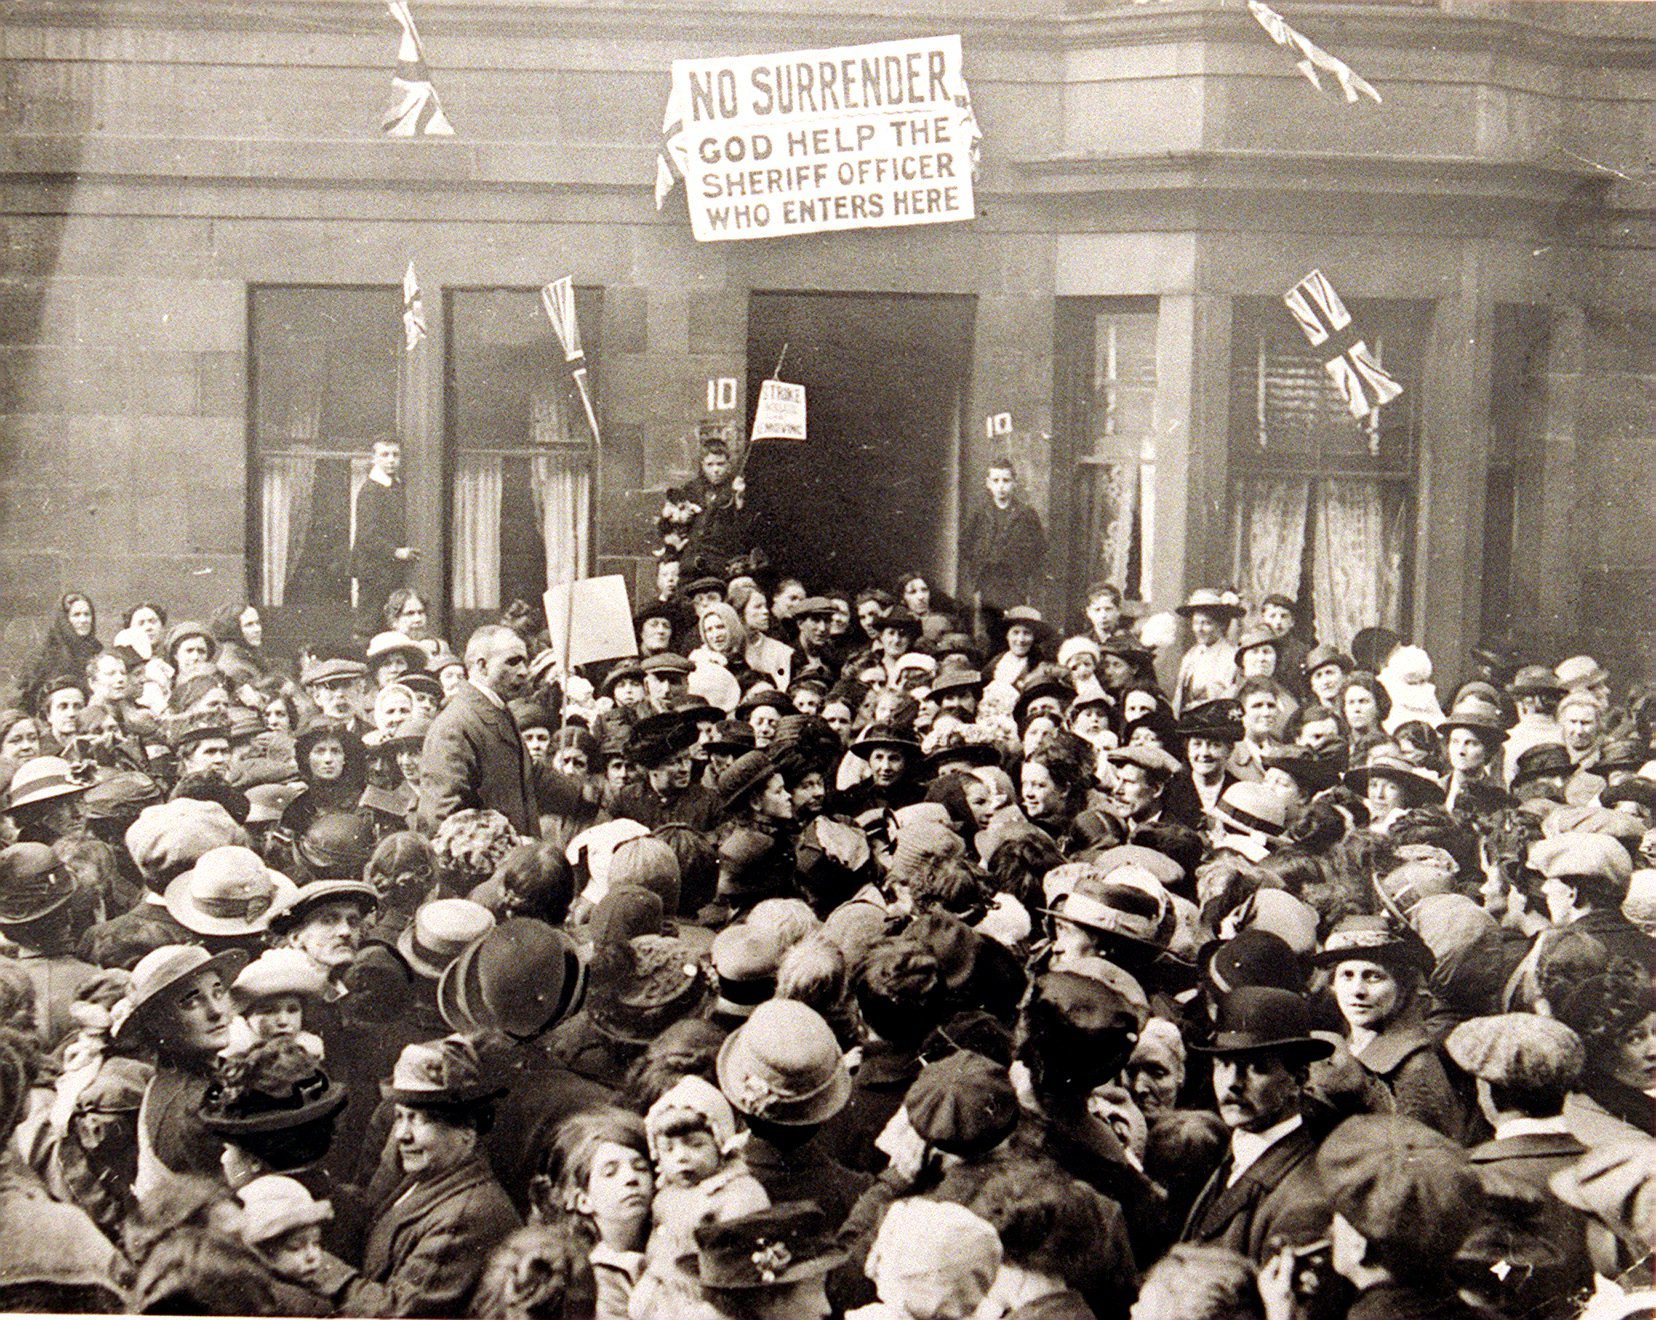 Glasgow Rent Strikes led by the Glasgow Women's Housing Association in 1915. (Photo by McDonald/Daily Record/Mirrorpix via Getty Images)